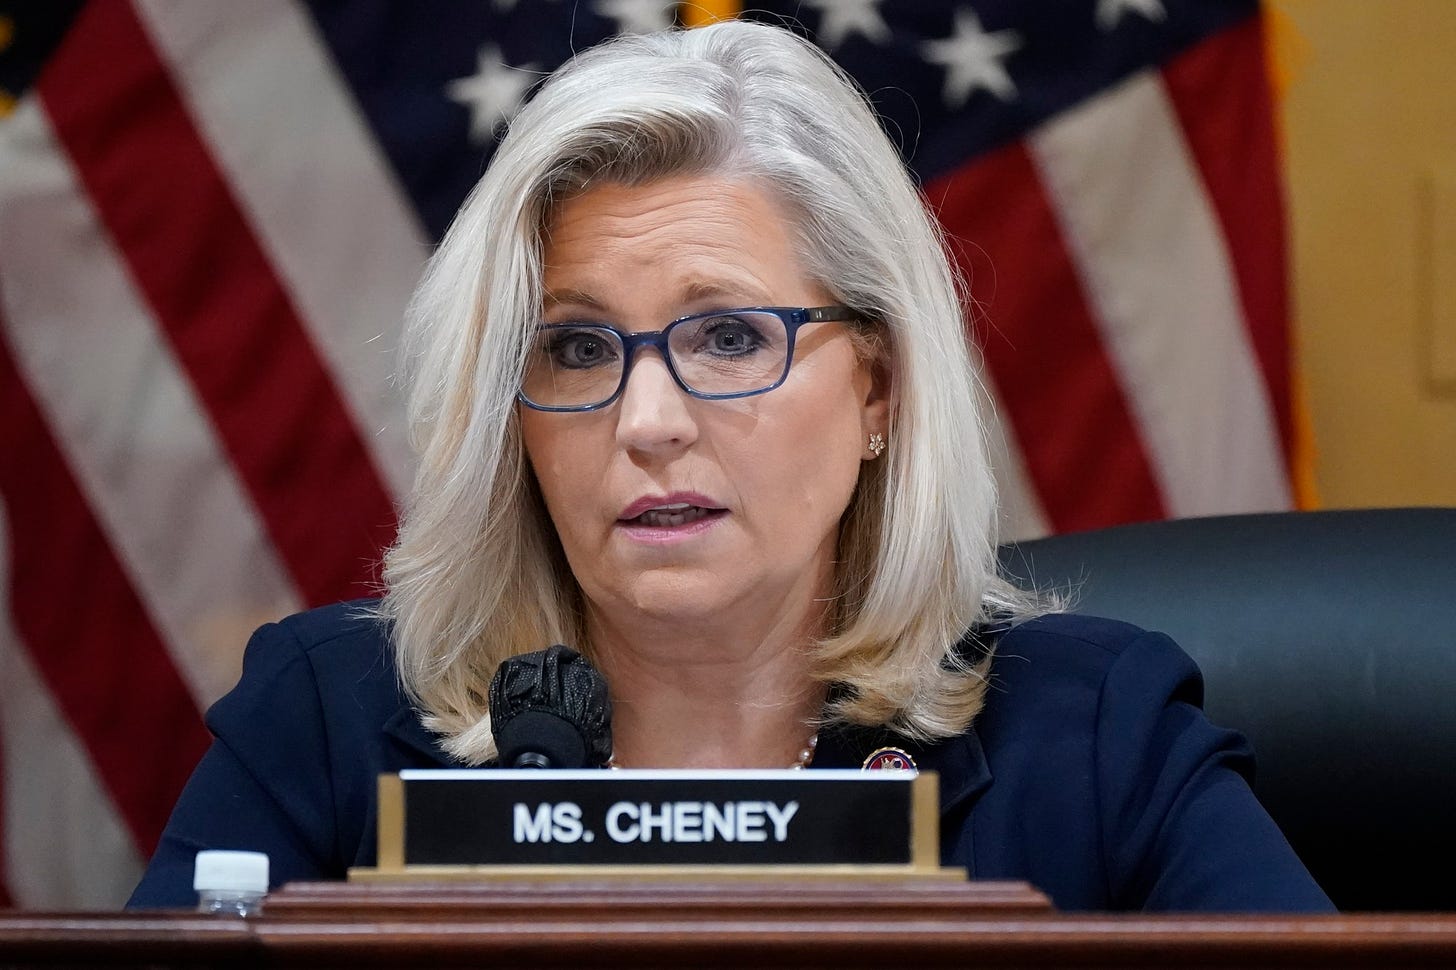 Liz Cheney will be gone from Congress but not forgotten | The Hill